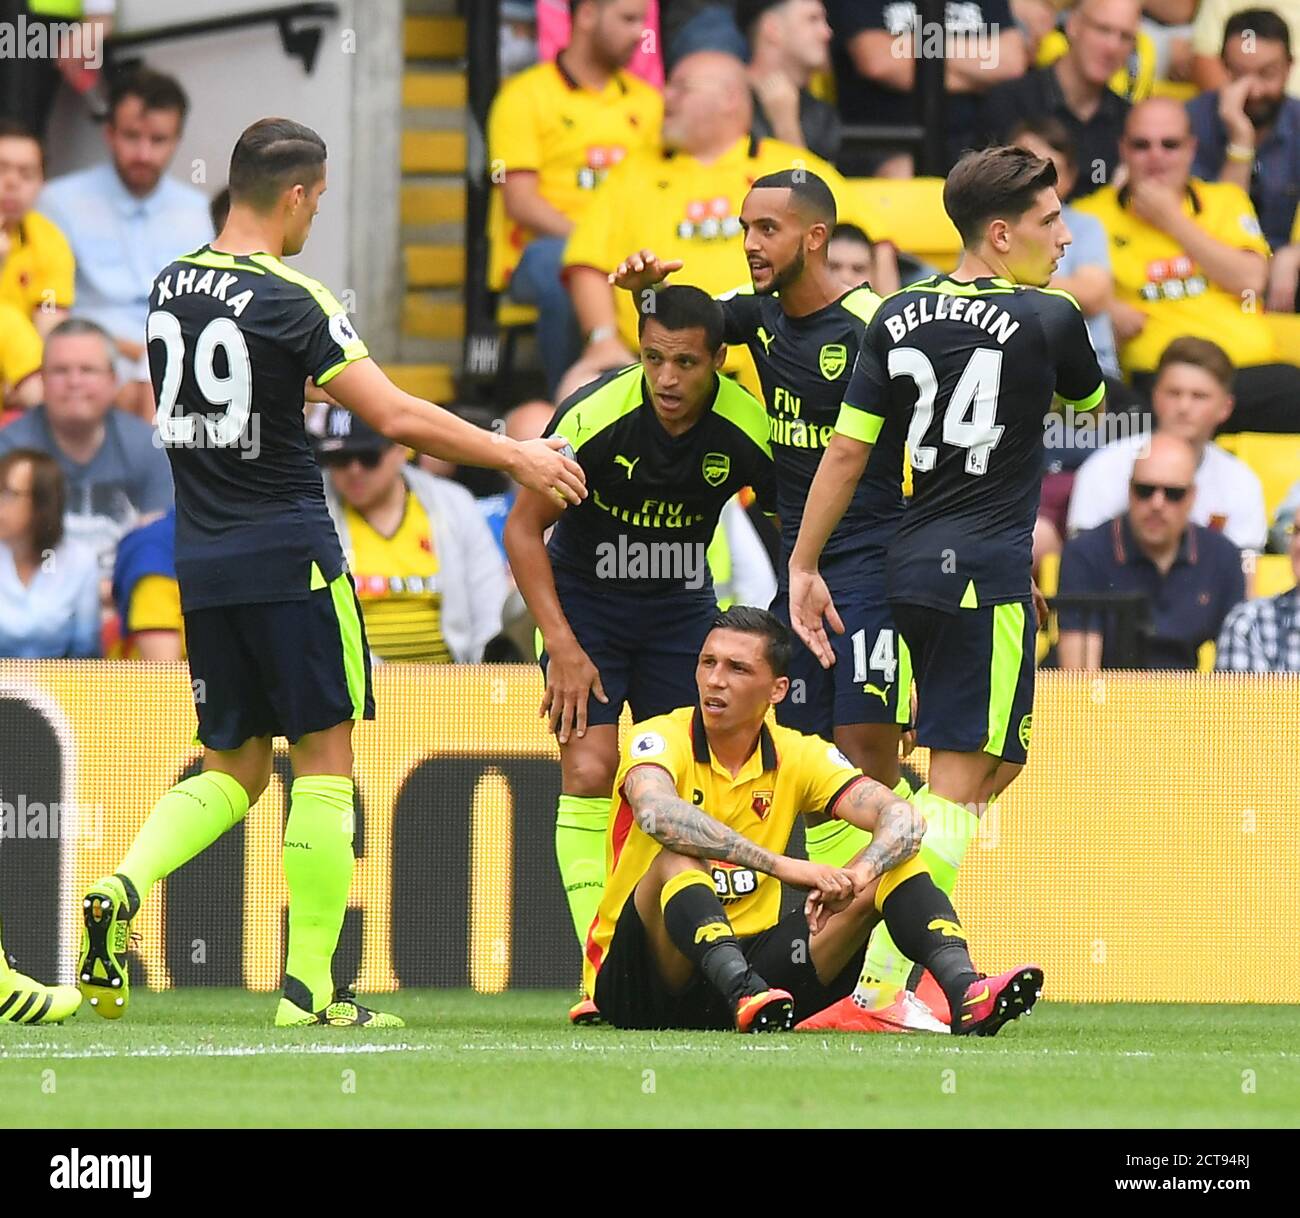 ALEXIS SANCHEZ CELEBRATES SCORING HIS HEADED GOAL FOR ARSENAL AND IT IS CONFIRMED TO HAVE CROSSED THE LINE BY GOAL-LINE TECHNOLOGY  Watford v Arsenal Stock Photo